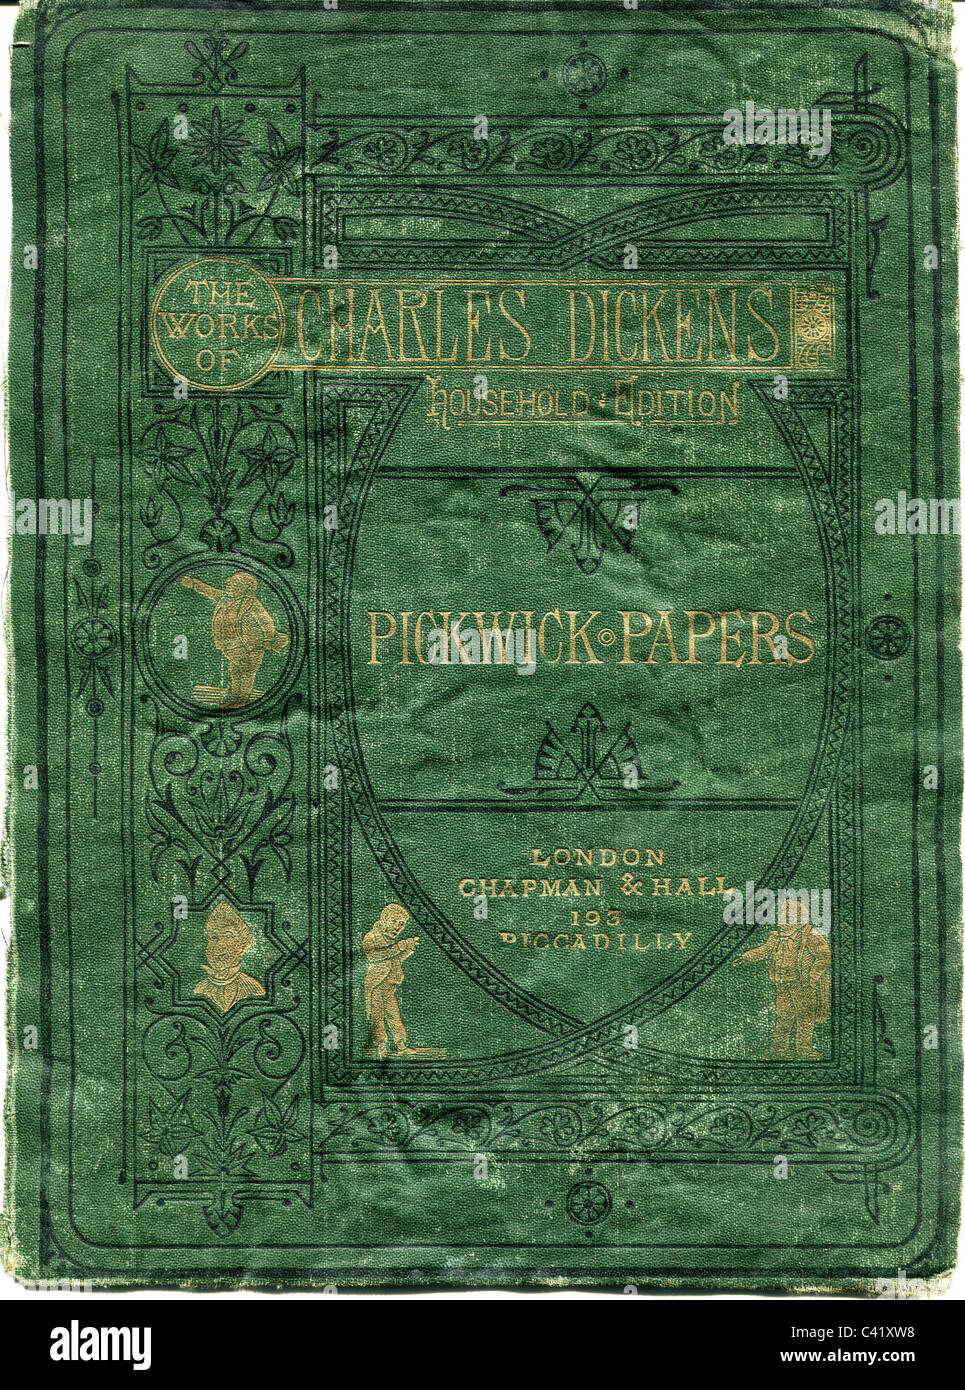 Dickens, Charles, 7.2.1812 - 9.7.1870, English author / writer, works, 'The Pickwick Papers', Household Edition, Chapman and Hall, London, 1871 - 1880, cover, Stock Photo